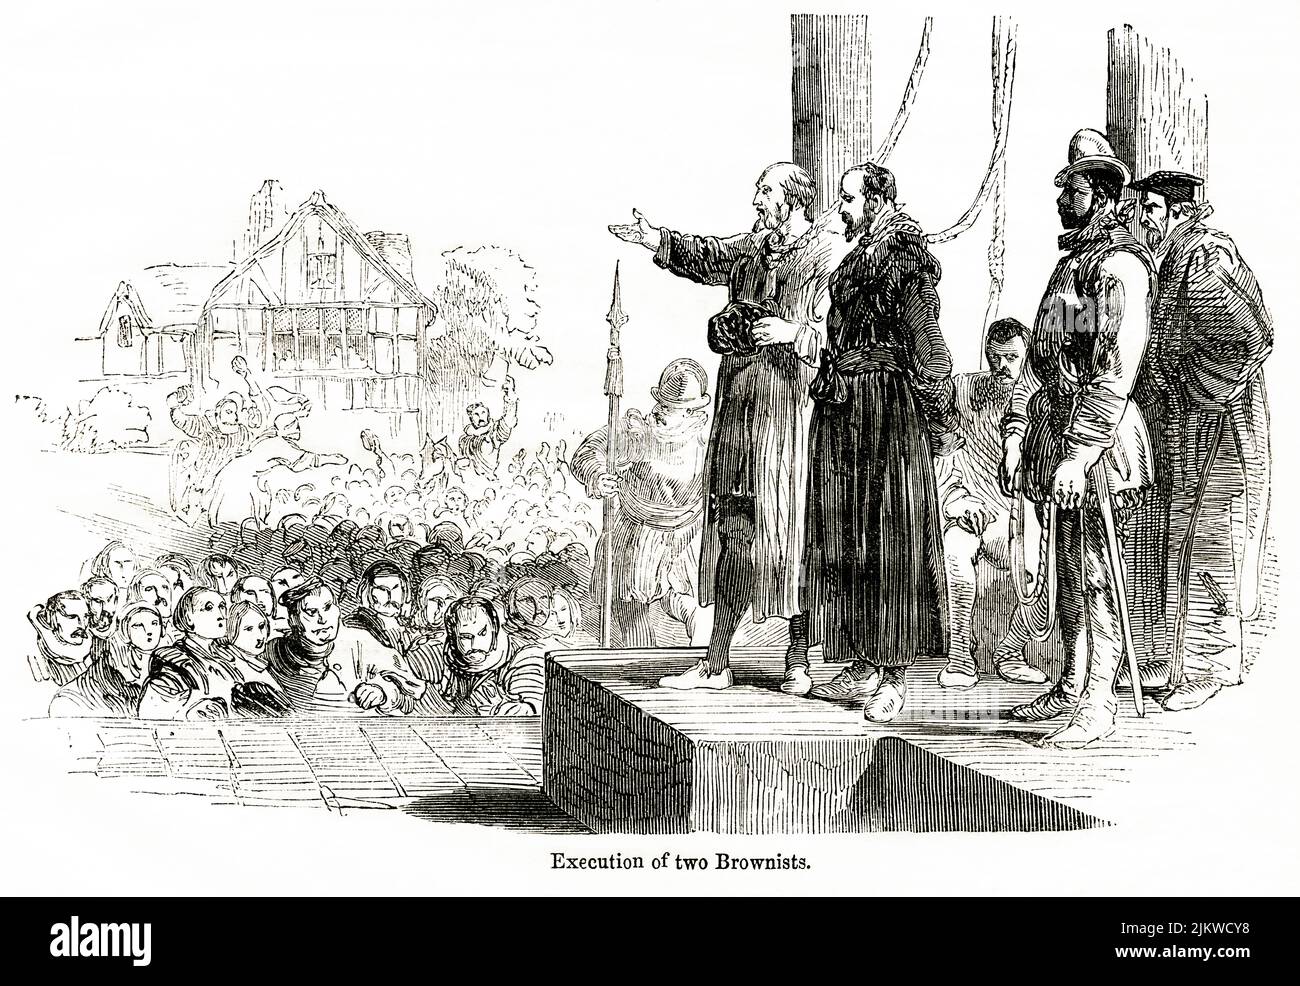 Execution of two Brownists, Illustration from the Book, 'John Cassel’s Illustrated History of England, Volume II', text by William Howitt, Cassell, Petter, and Galpin, London, 1858 Stock Photo